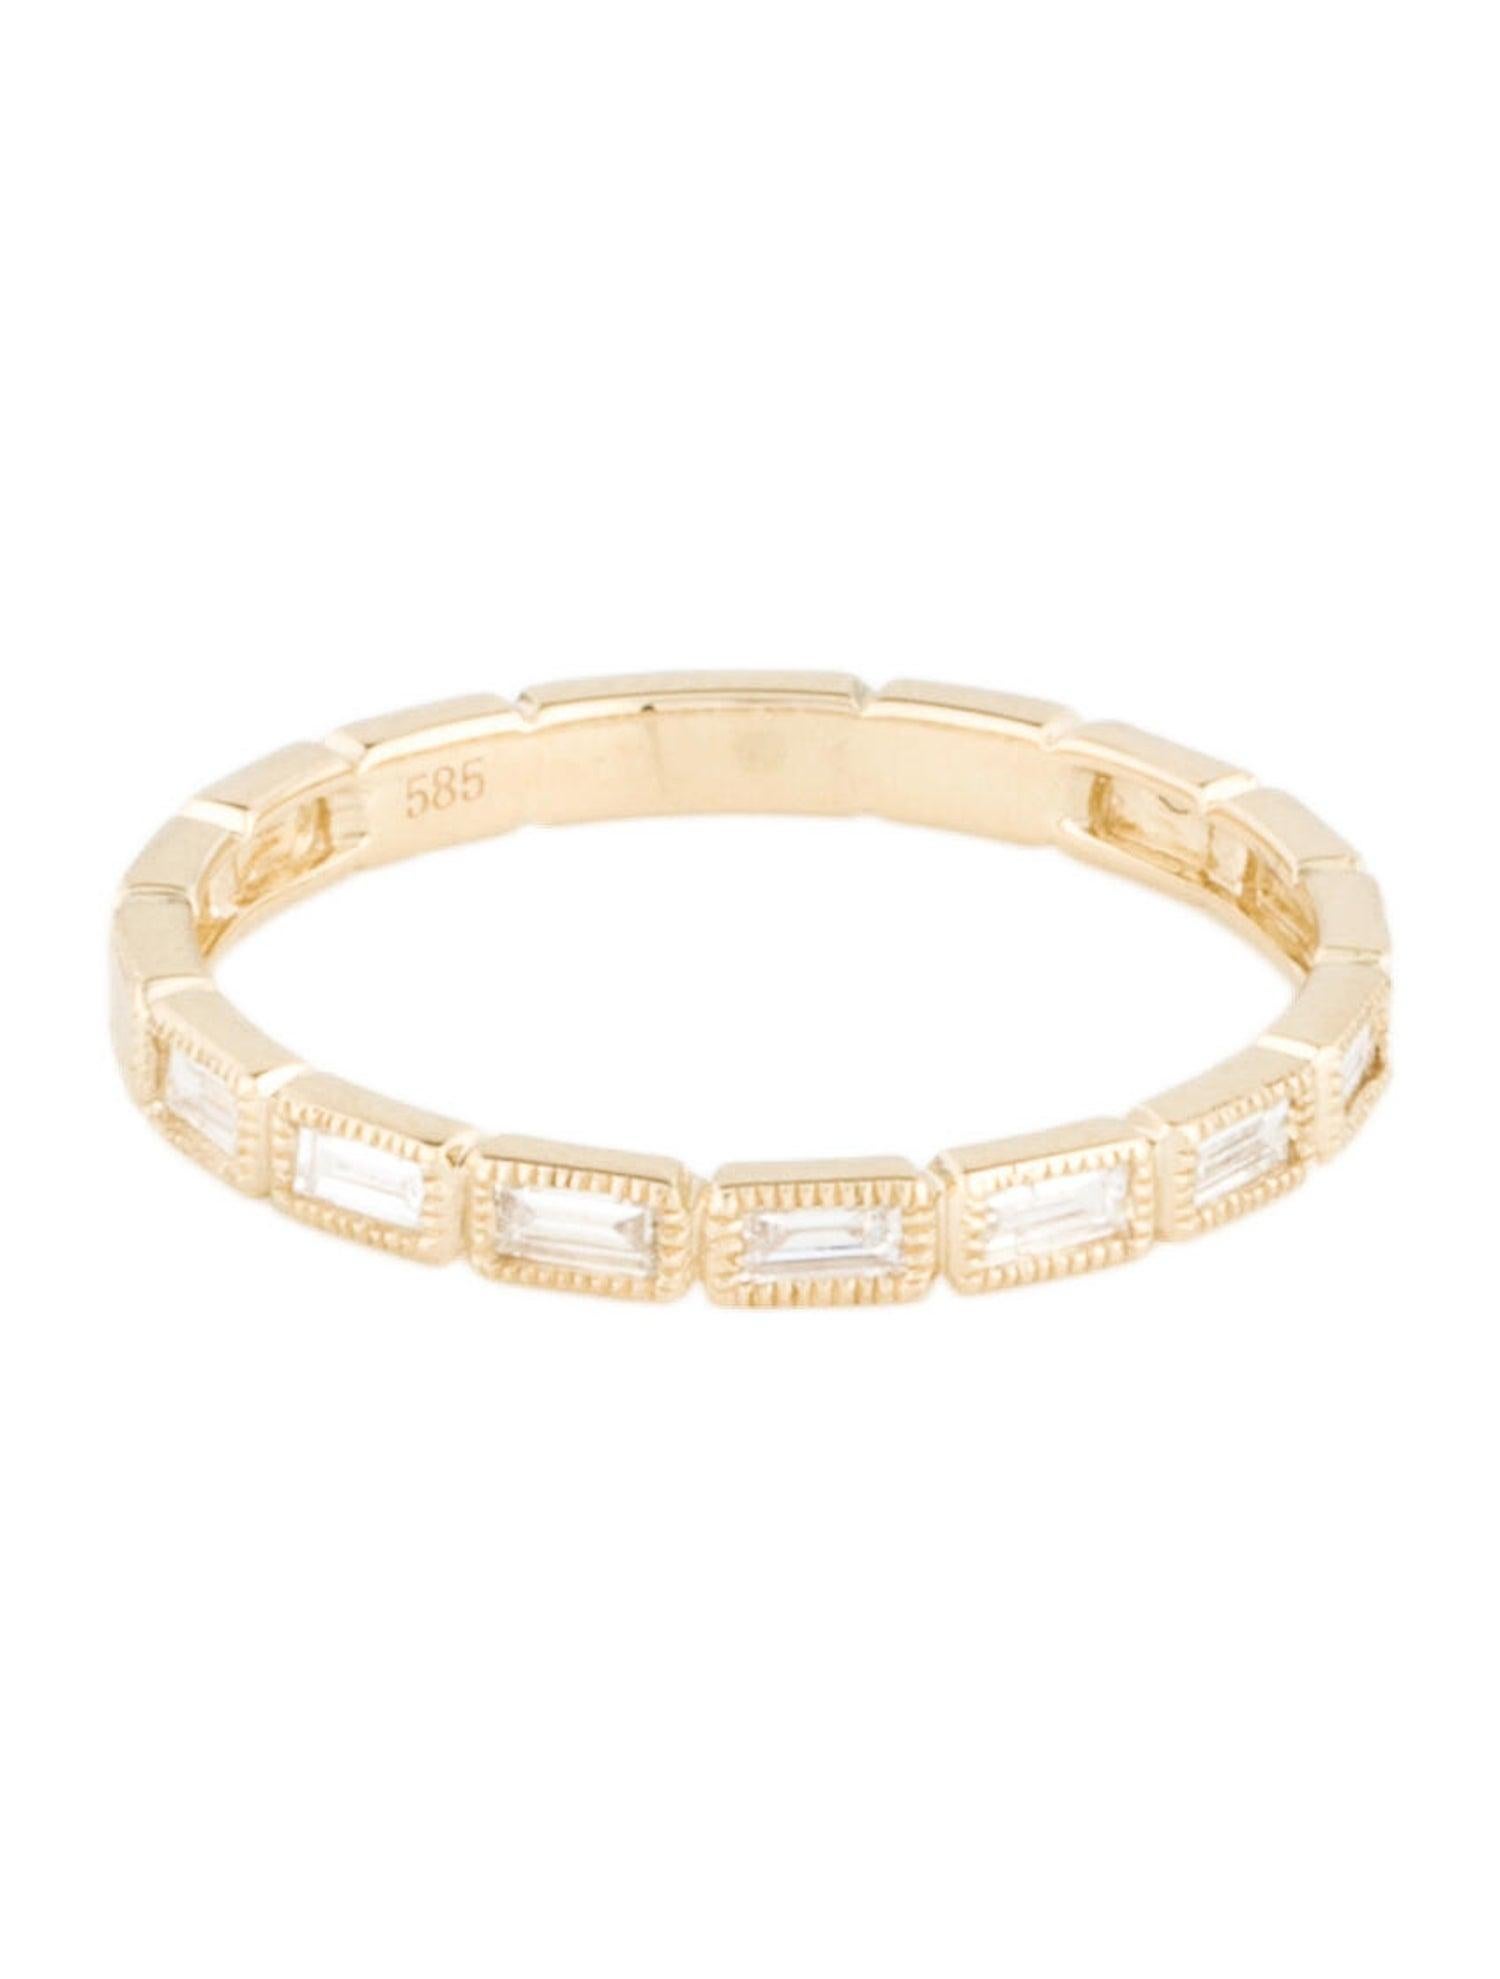 This is a Beautiful Diamond Stackable Eternity Band crafted of 14K Gold featuring Baguettes 0.20 ct. TDW, Diamond Color & Clarity is GH-SI1, Can be worn stacked or alone! 
 
 14K Gold 
 Total Diamond Weight: 0.20 ct. 
 Baguette Cut Diamonds 
